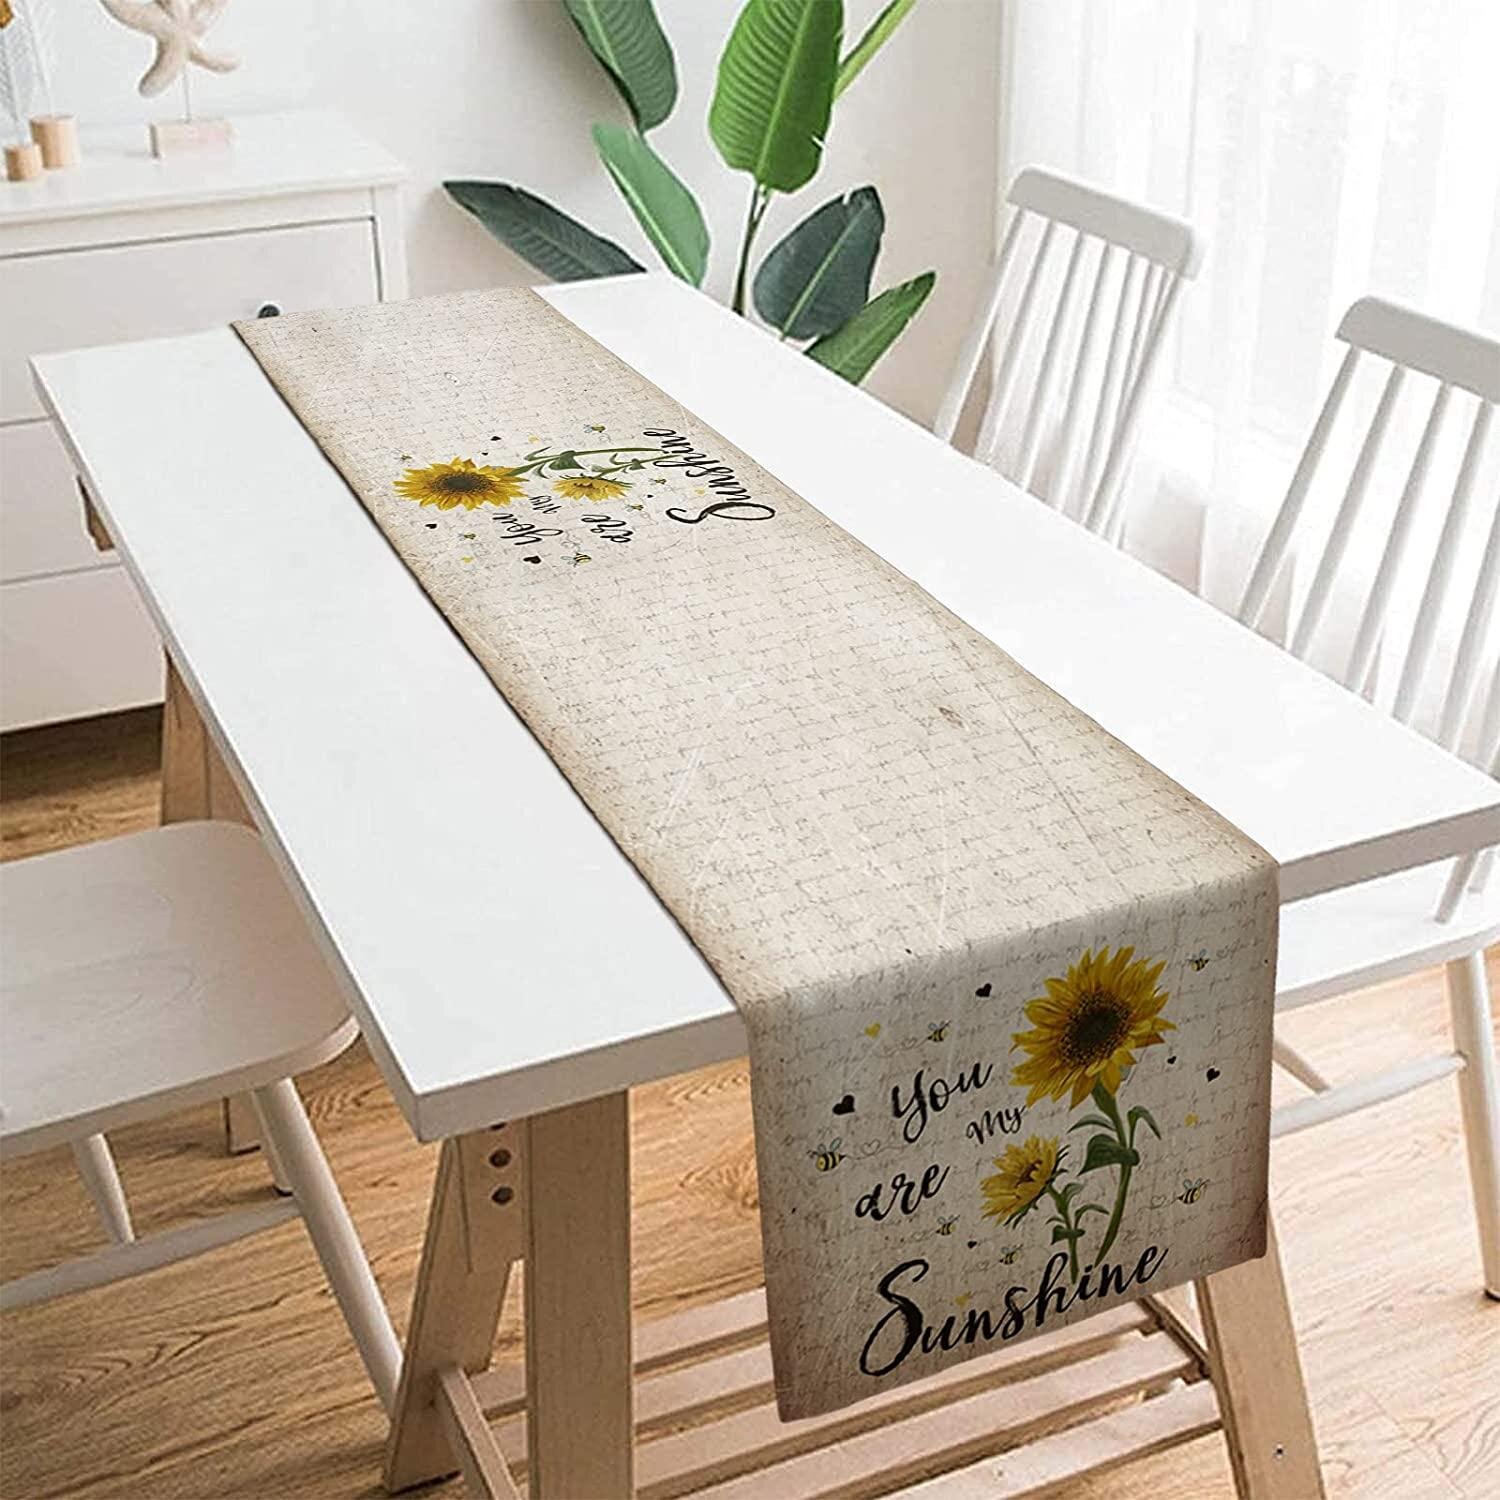 Table Runner Sunflower Kitchen Dining Room Rustic Farmhouse Decor 13x70" New 